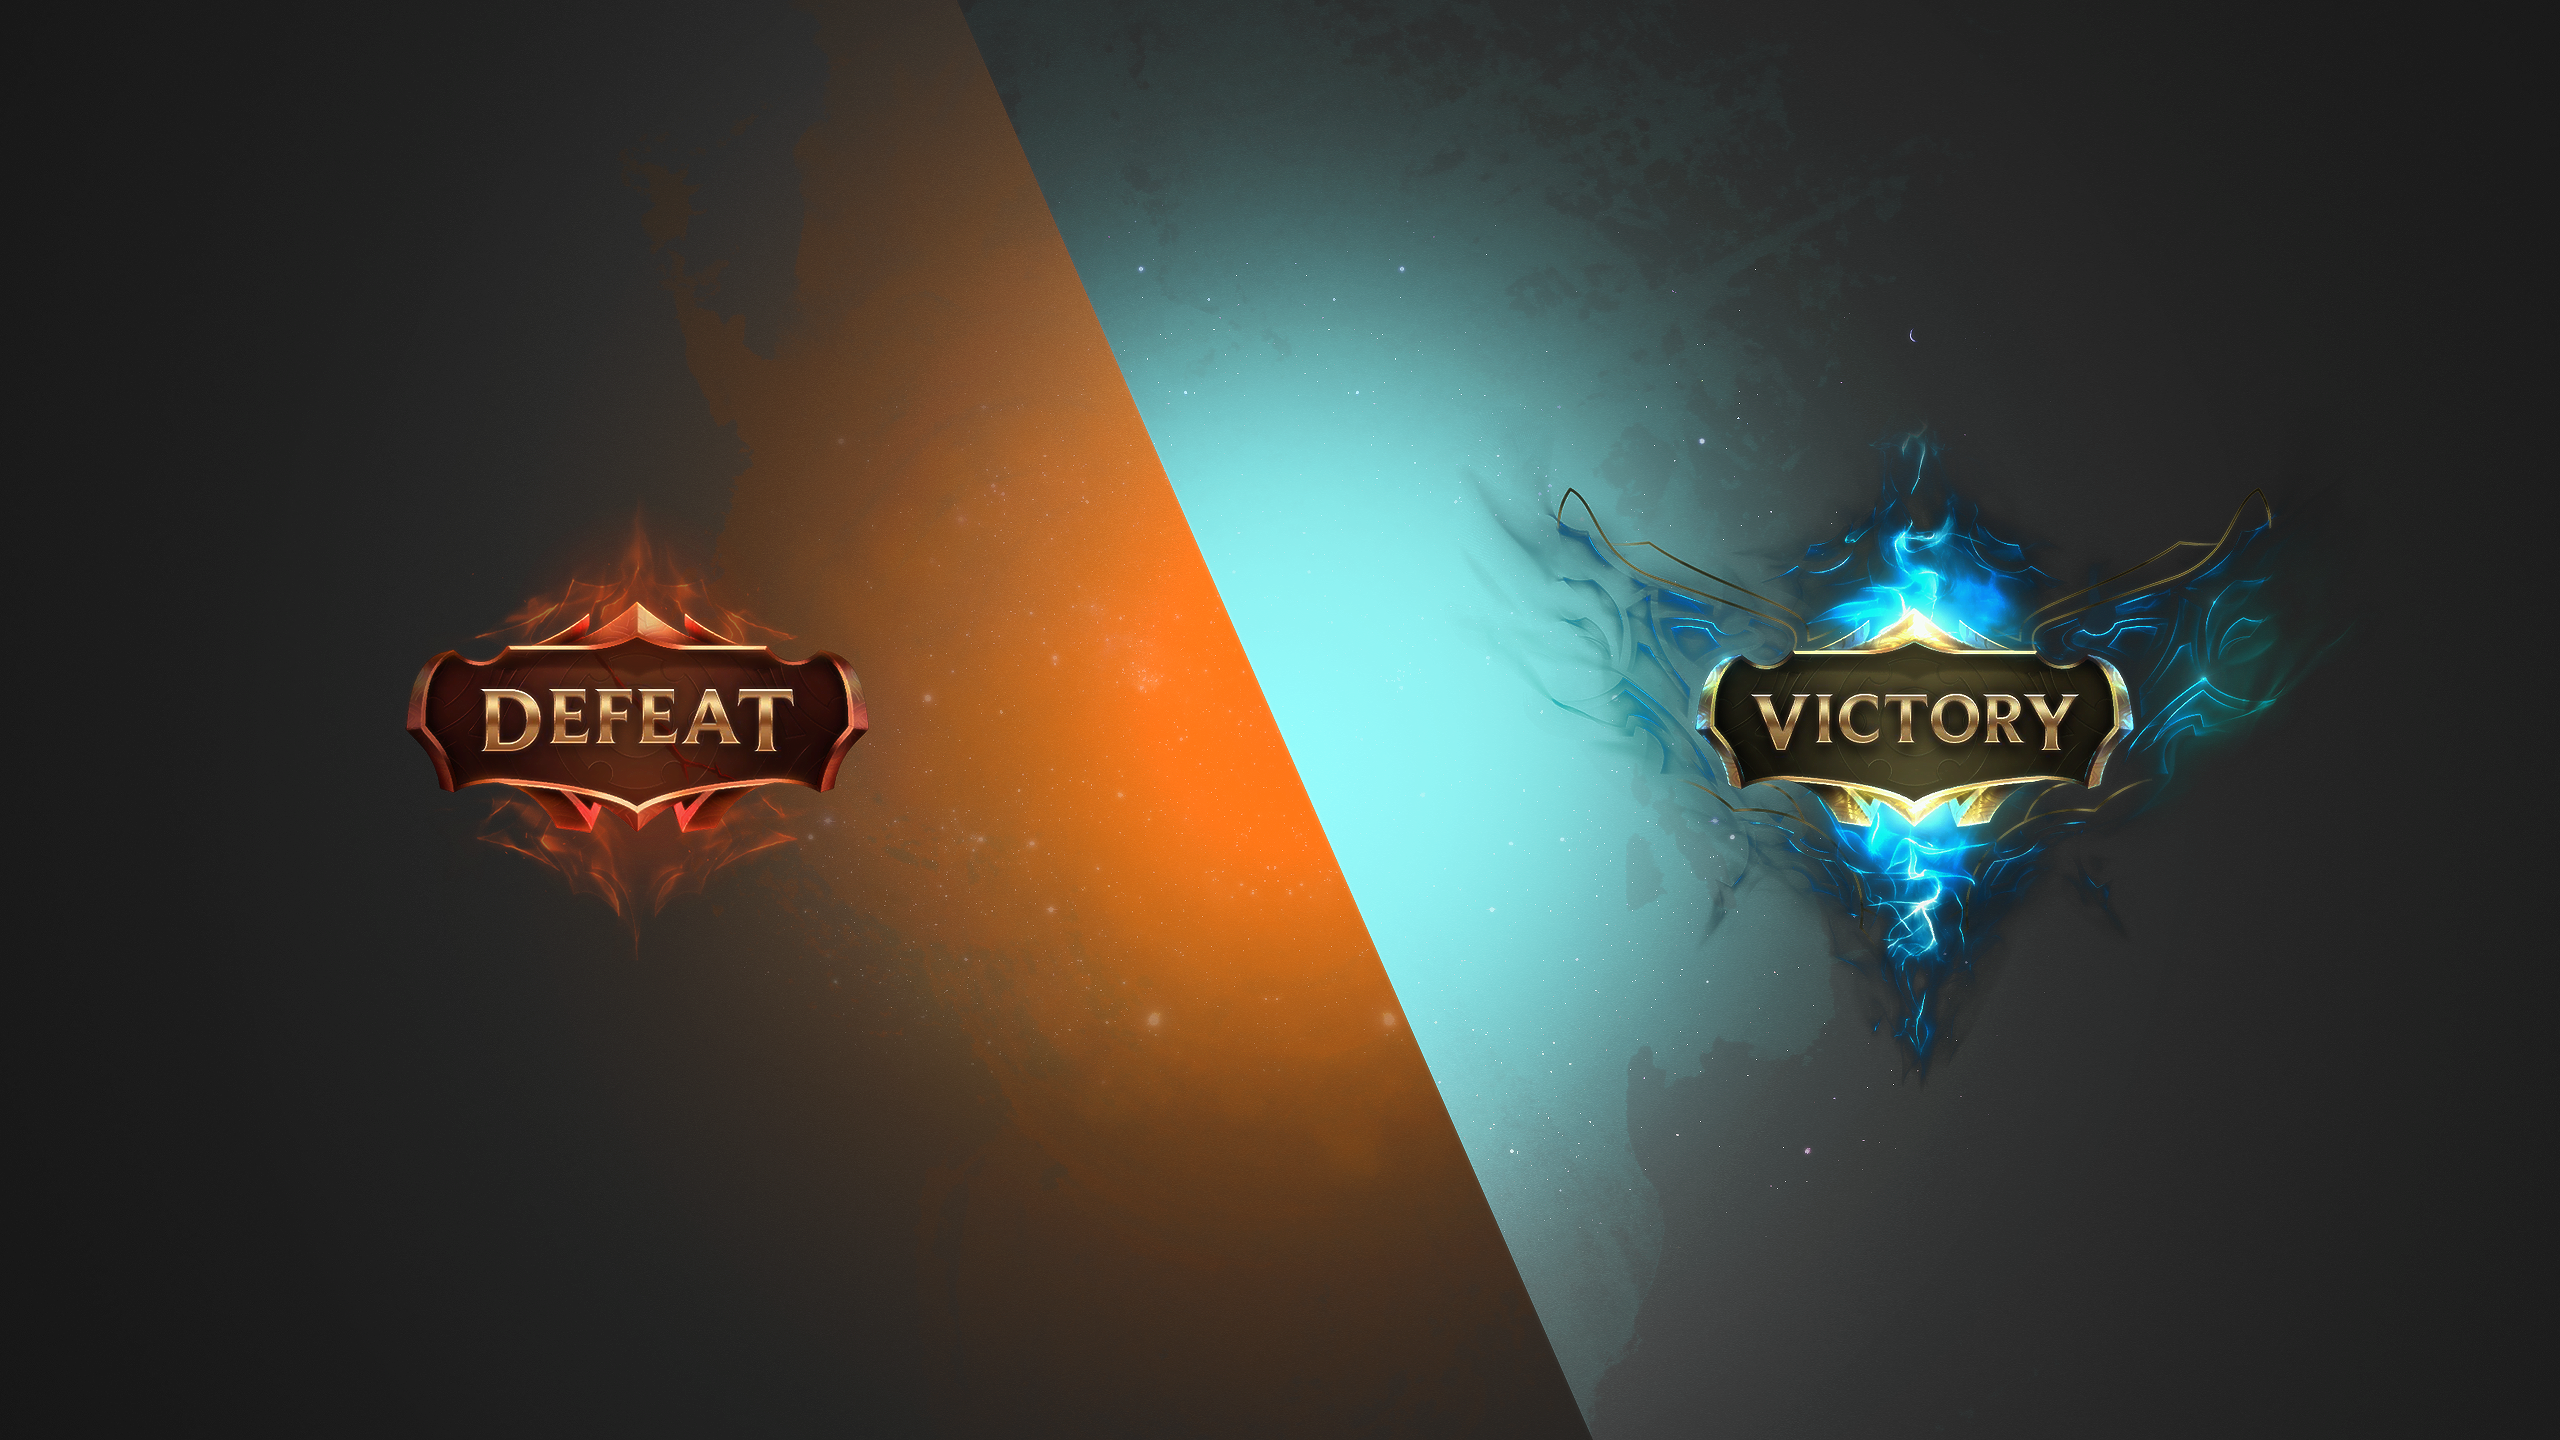 I made some wallpapers with the new VictoryDefeat images 2560x1440